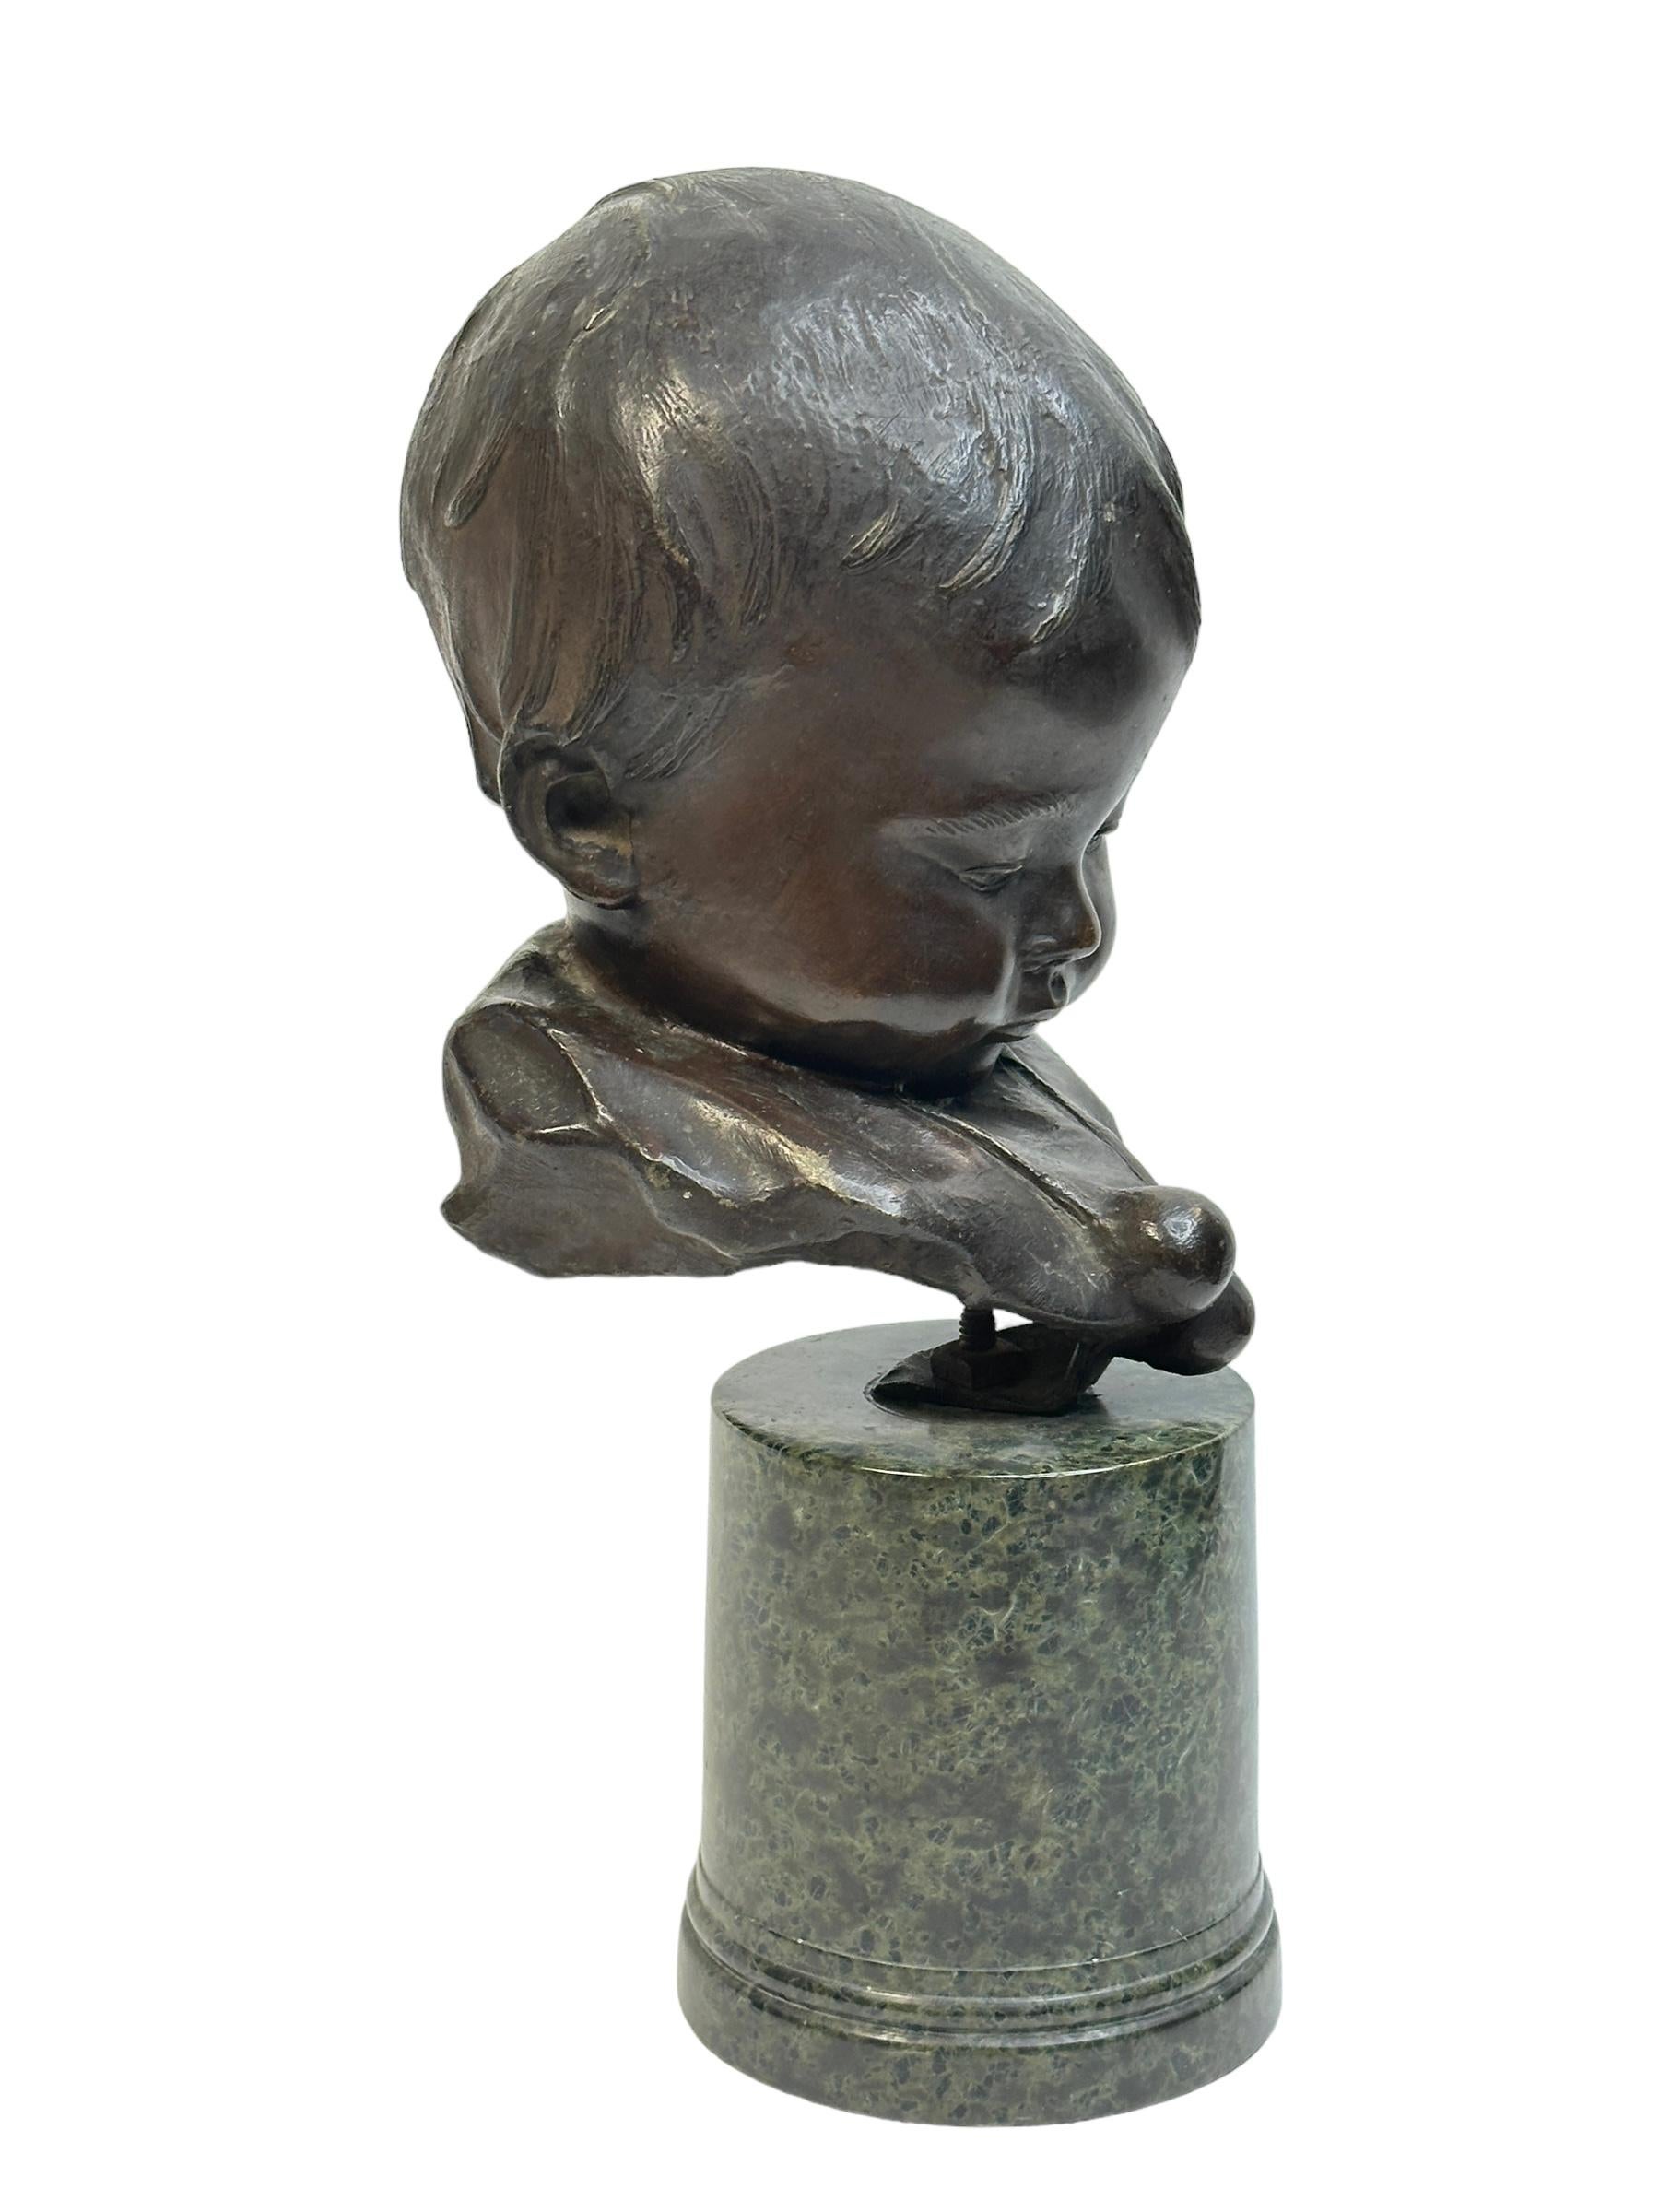 A classic very decorative bronze statue by Bernardo Balestrieri depicting a Boys Head. The bronze 1884 and past away 1965 - This Bronze is known as 